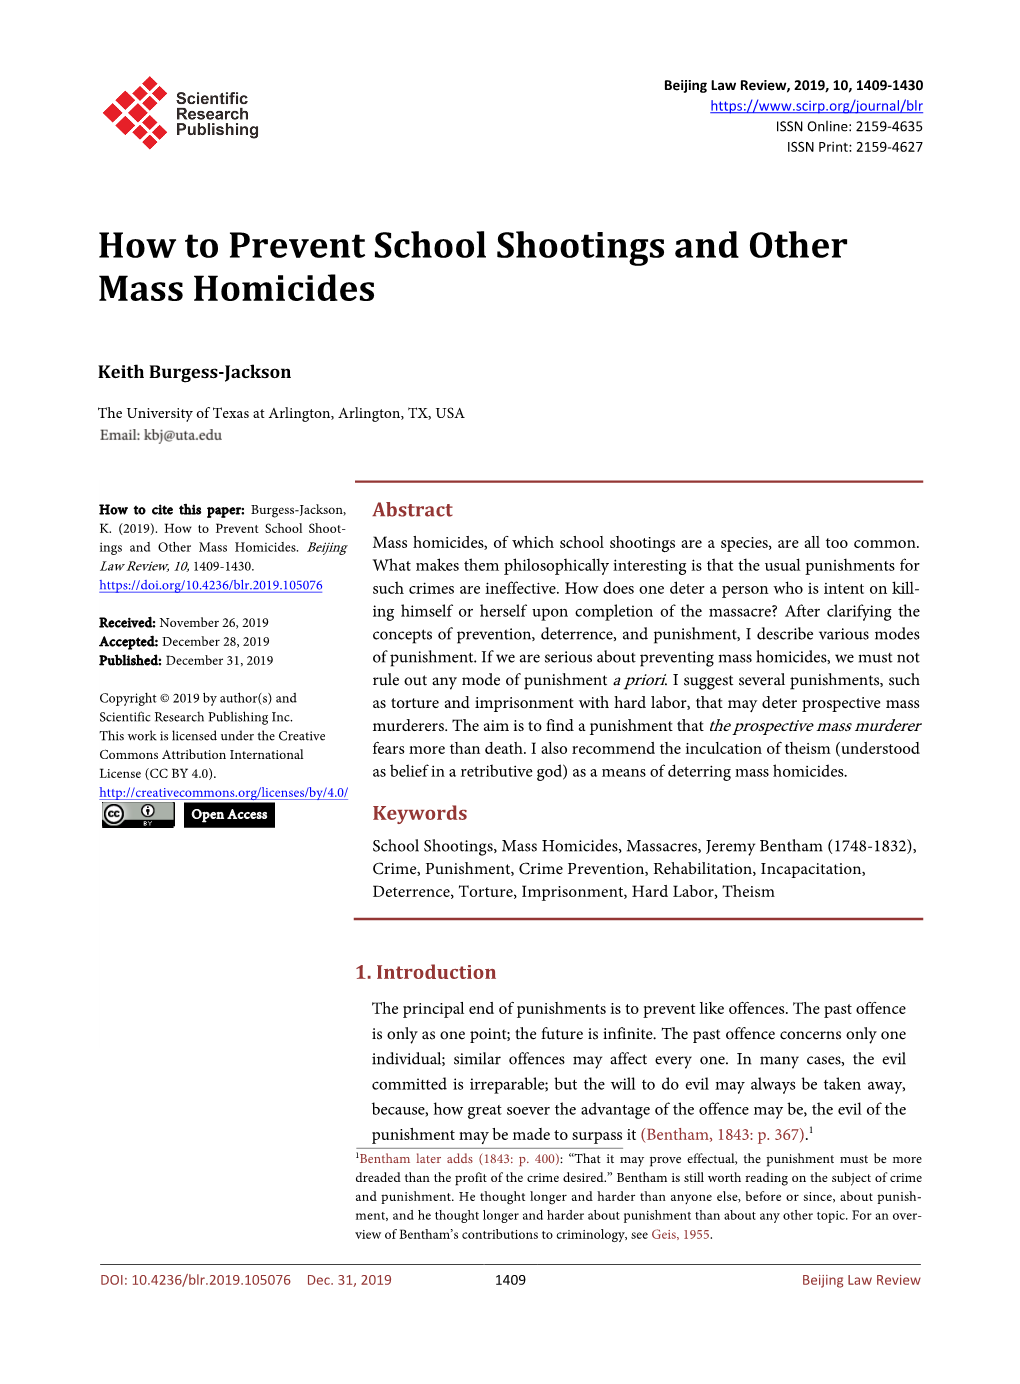 How to Prevent School Shootings and Other Mass Homicides